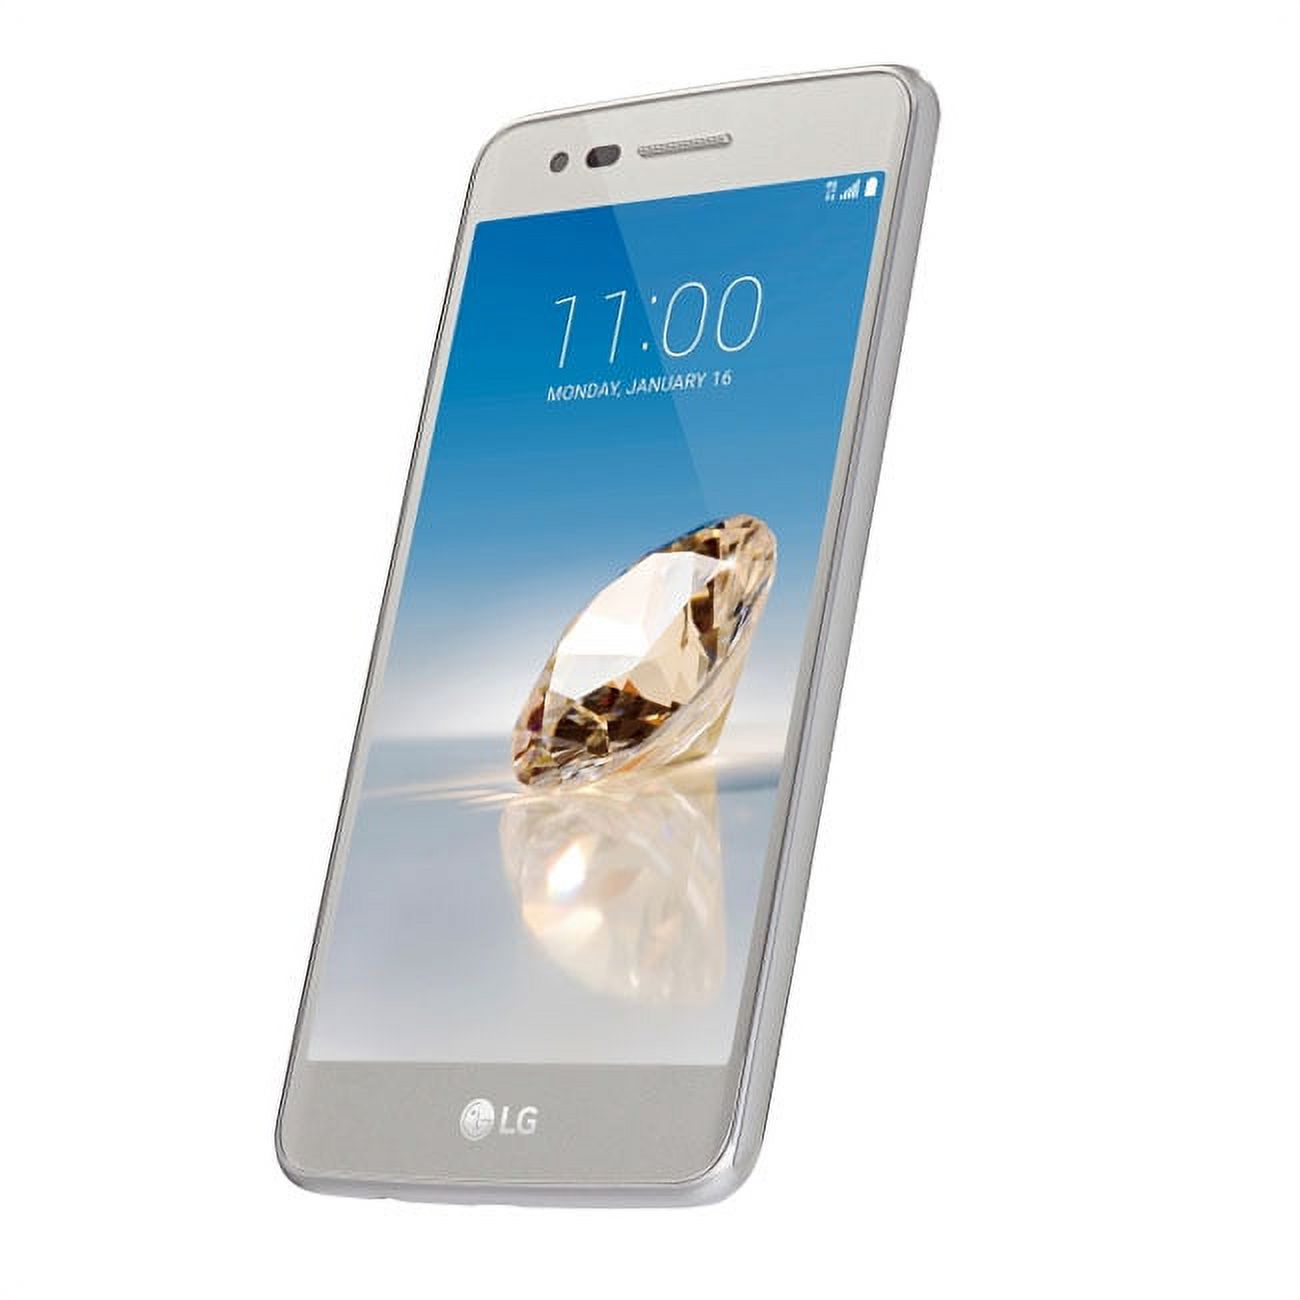 Pre-Owned LG Aristo M210 GSM (T-Mobile Unlocked) 16GB 5.0" Android Smartphone, Silver (Good) - image 5 of 5